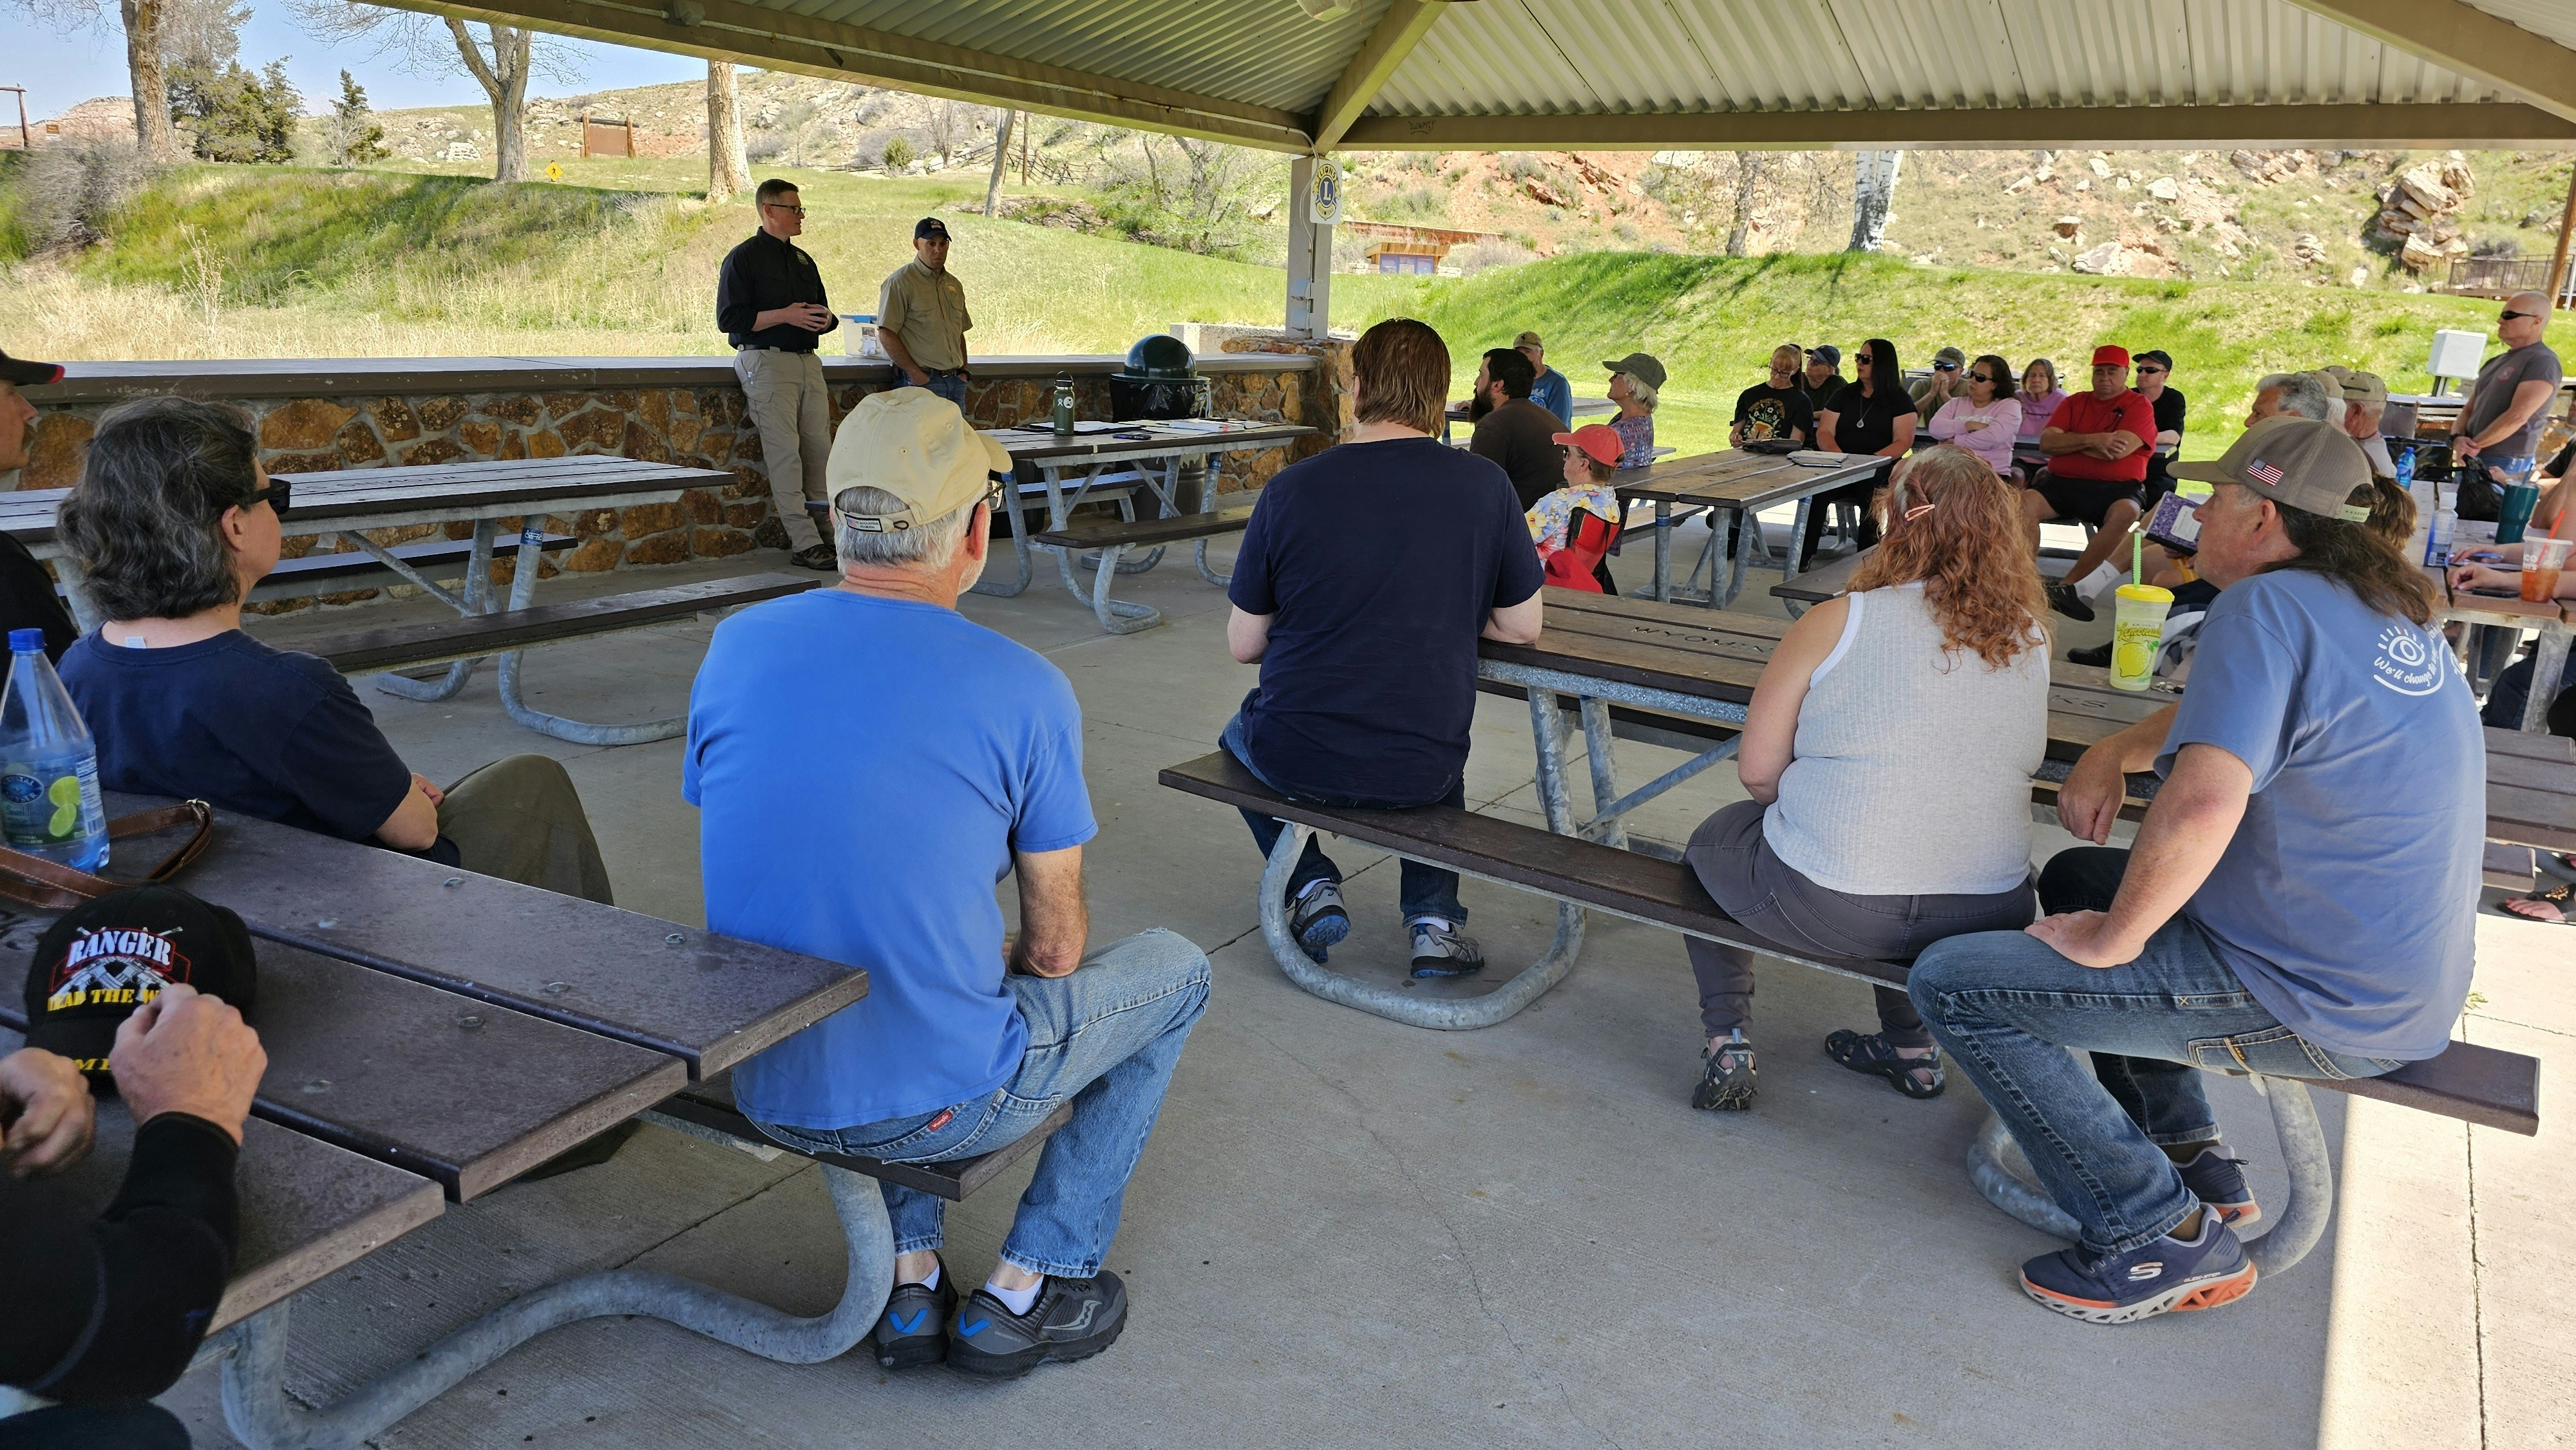 Between 30 and 40 people showed up for a question and answer session about proposed changes to Hot Springs State Park held Monday afternoon.